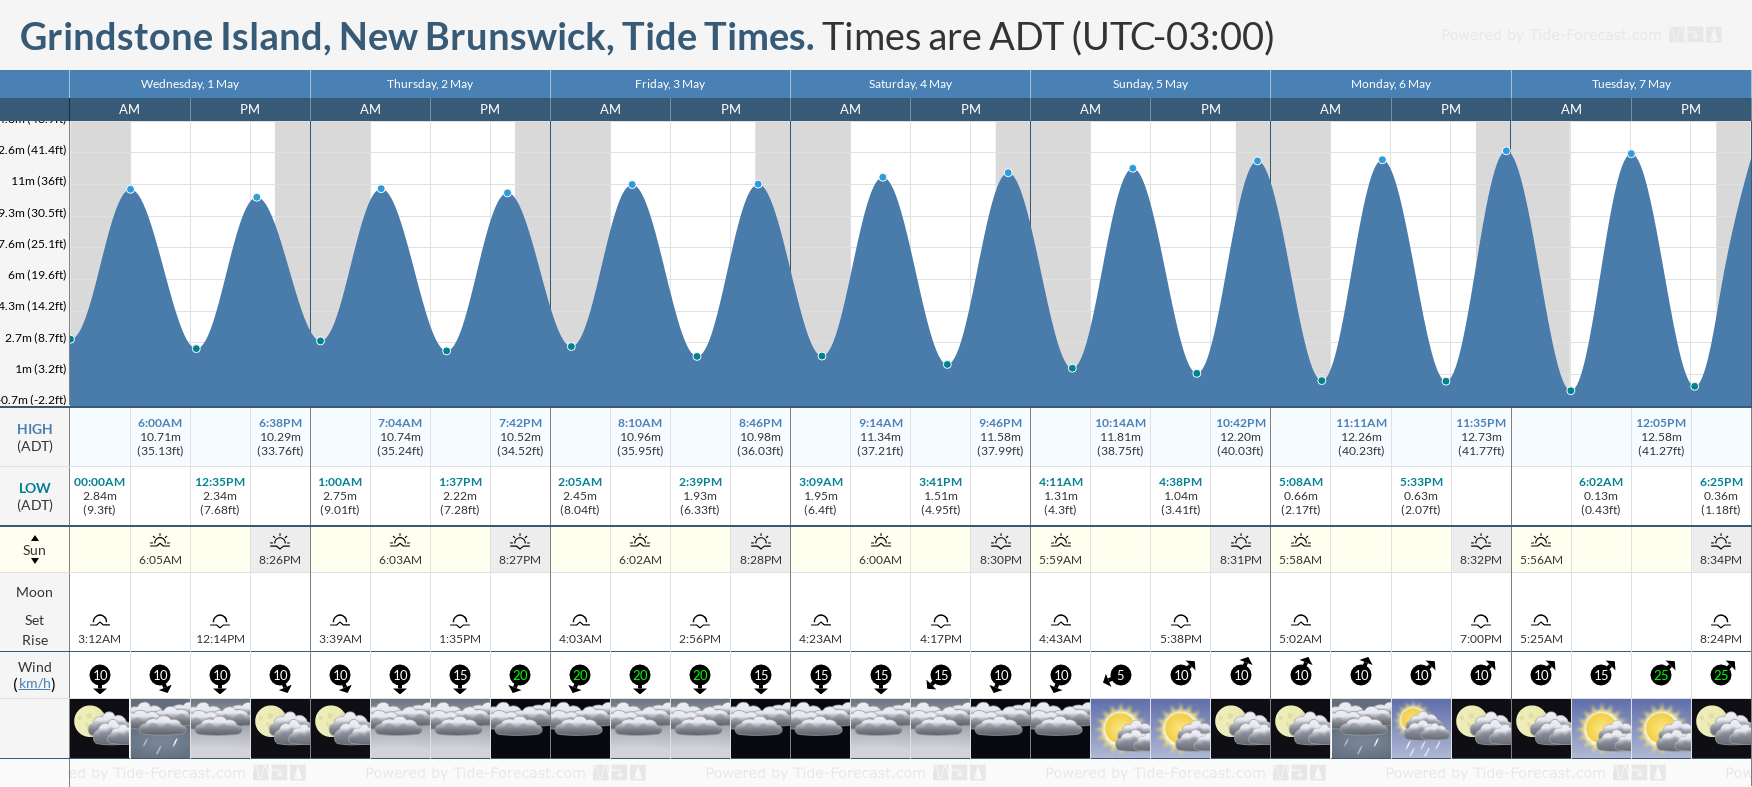 Grindstone Island, New Brunswick Tide Chart including high and low tide tide times for the next 7 days